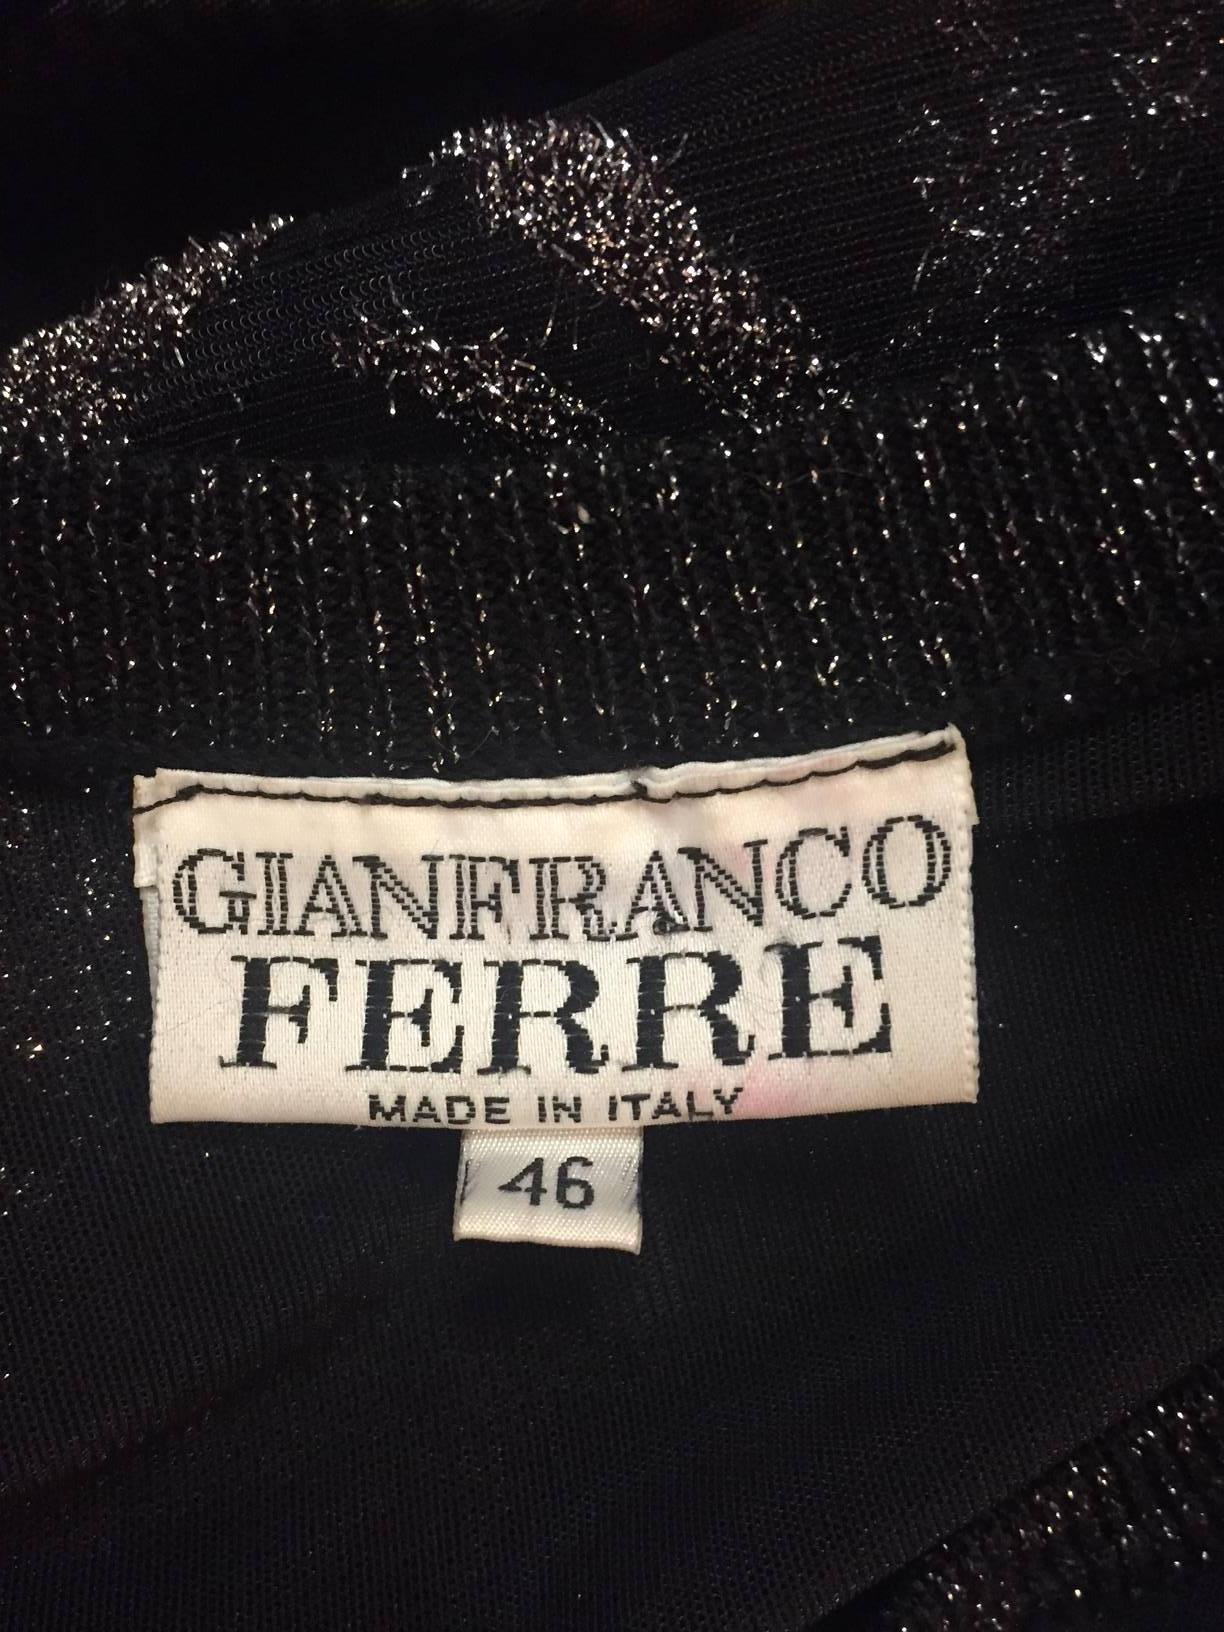 1990s Gianfranco Ferre Navy Sheer Net Blazer w Sequined Patch Pockets and Lapel For Sale 3